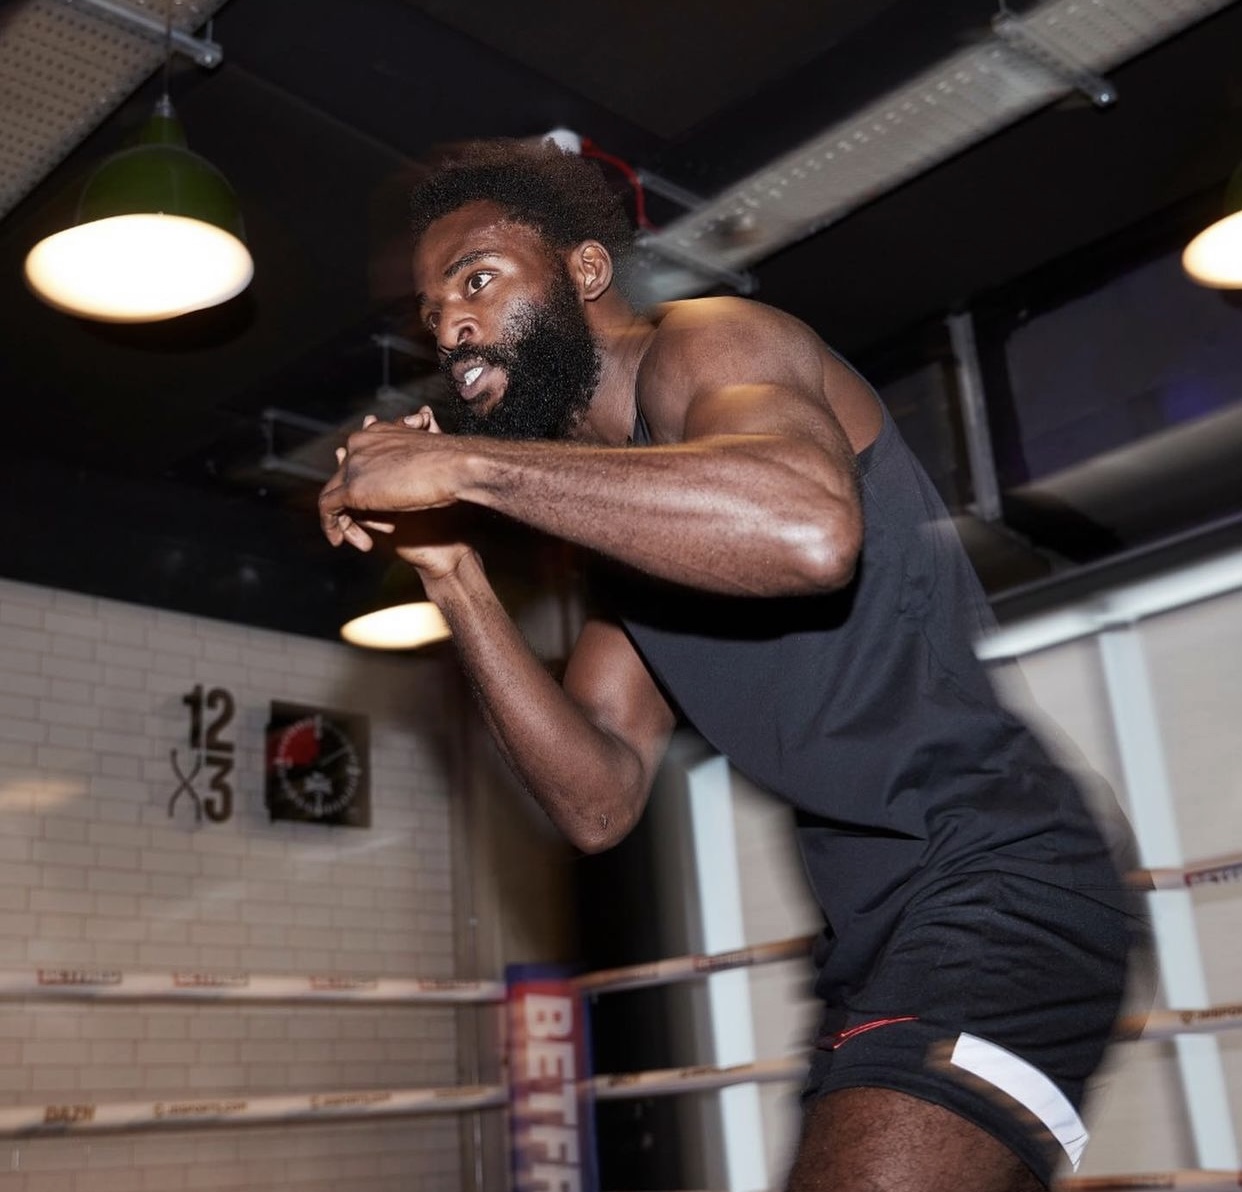 Buatsi and Richards did their public training in London 